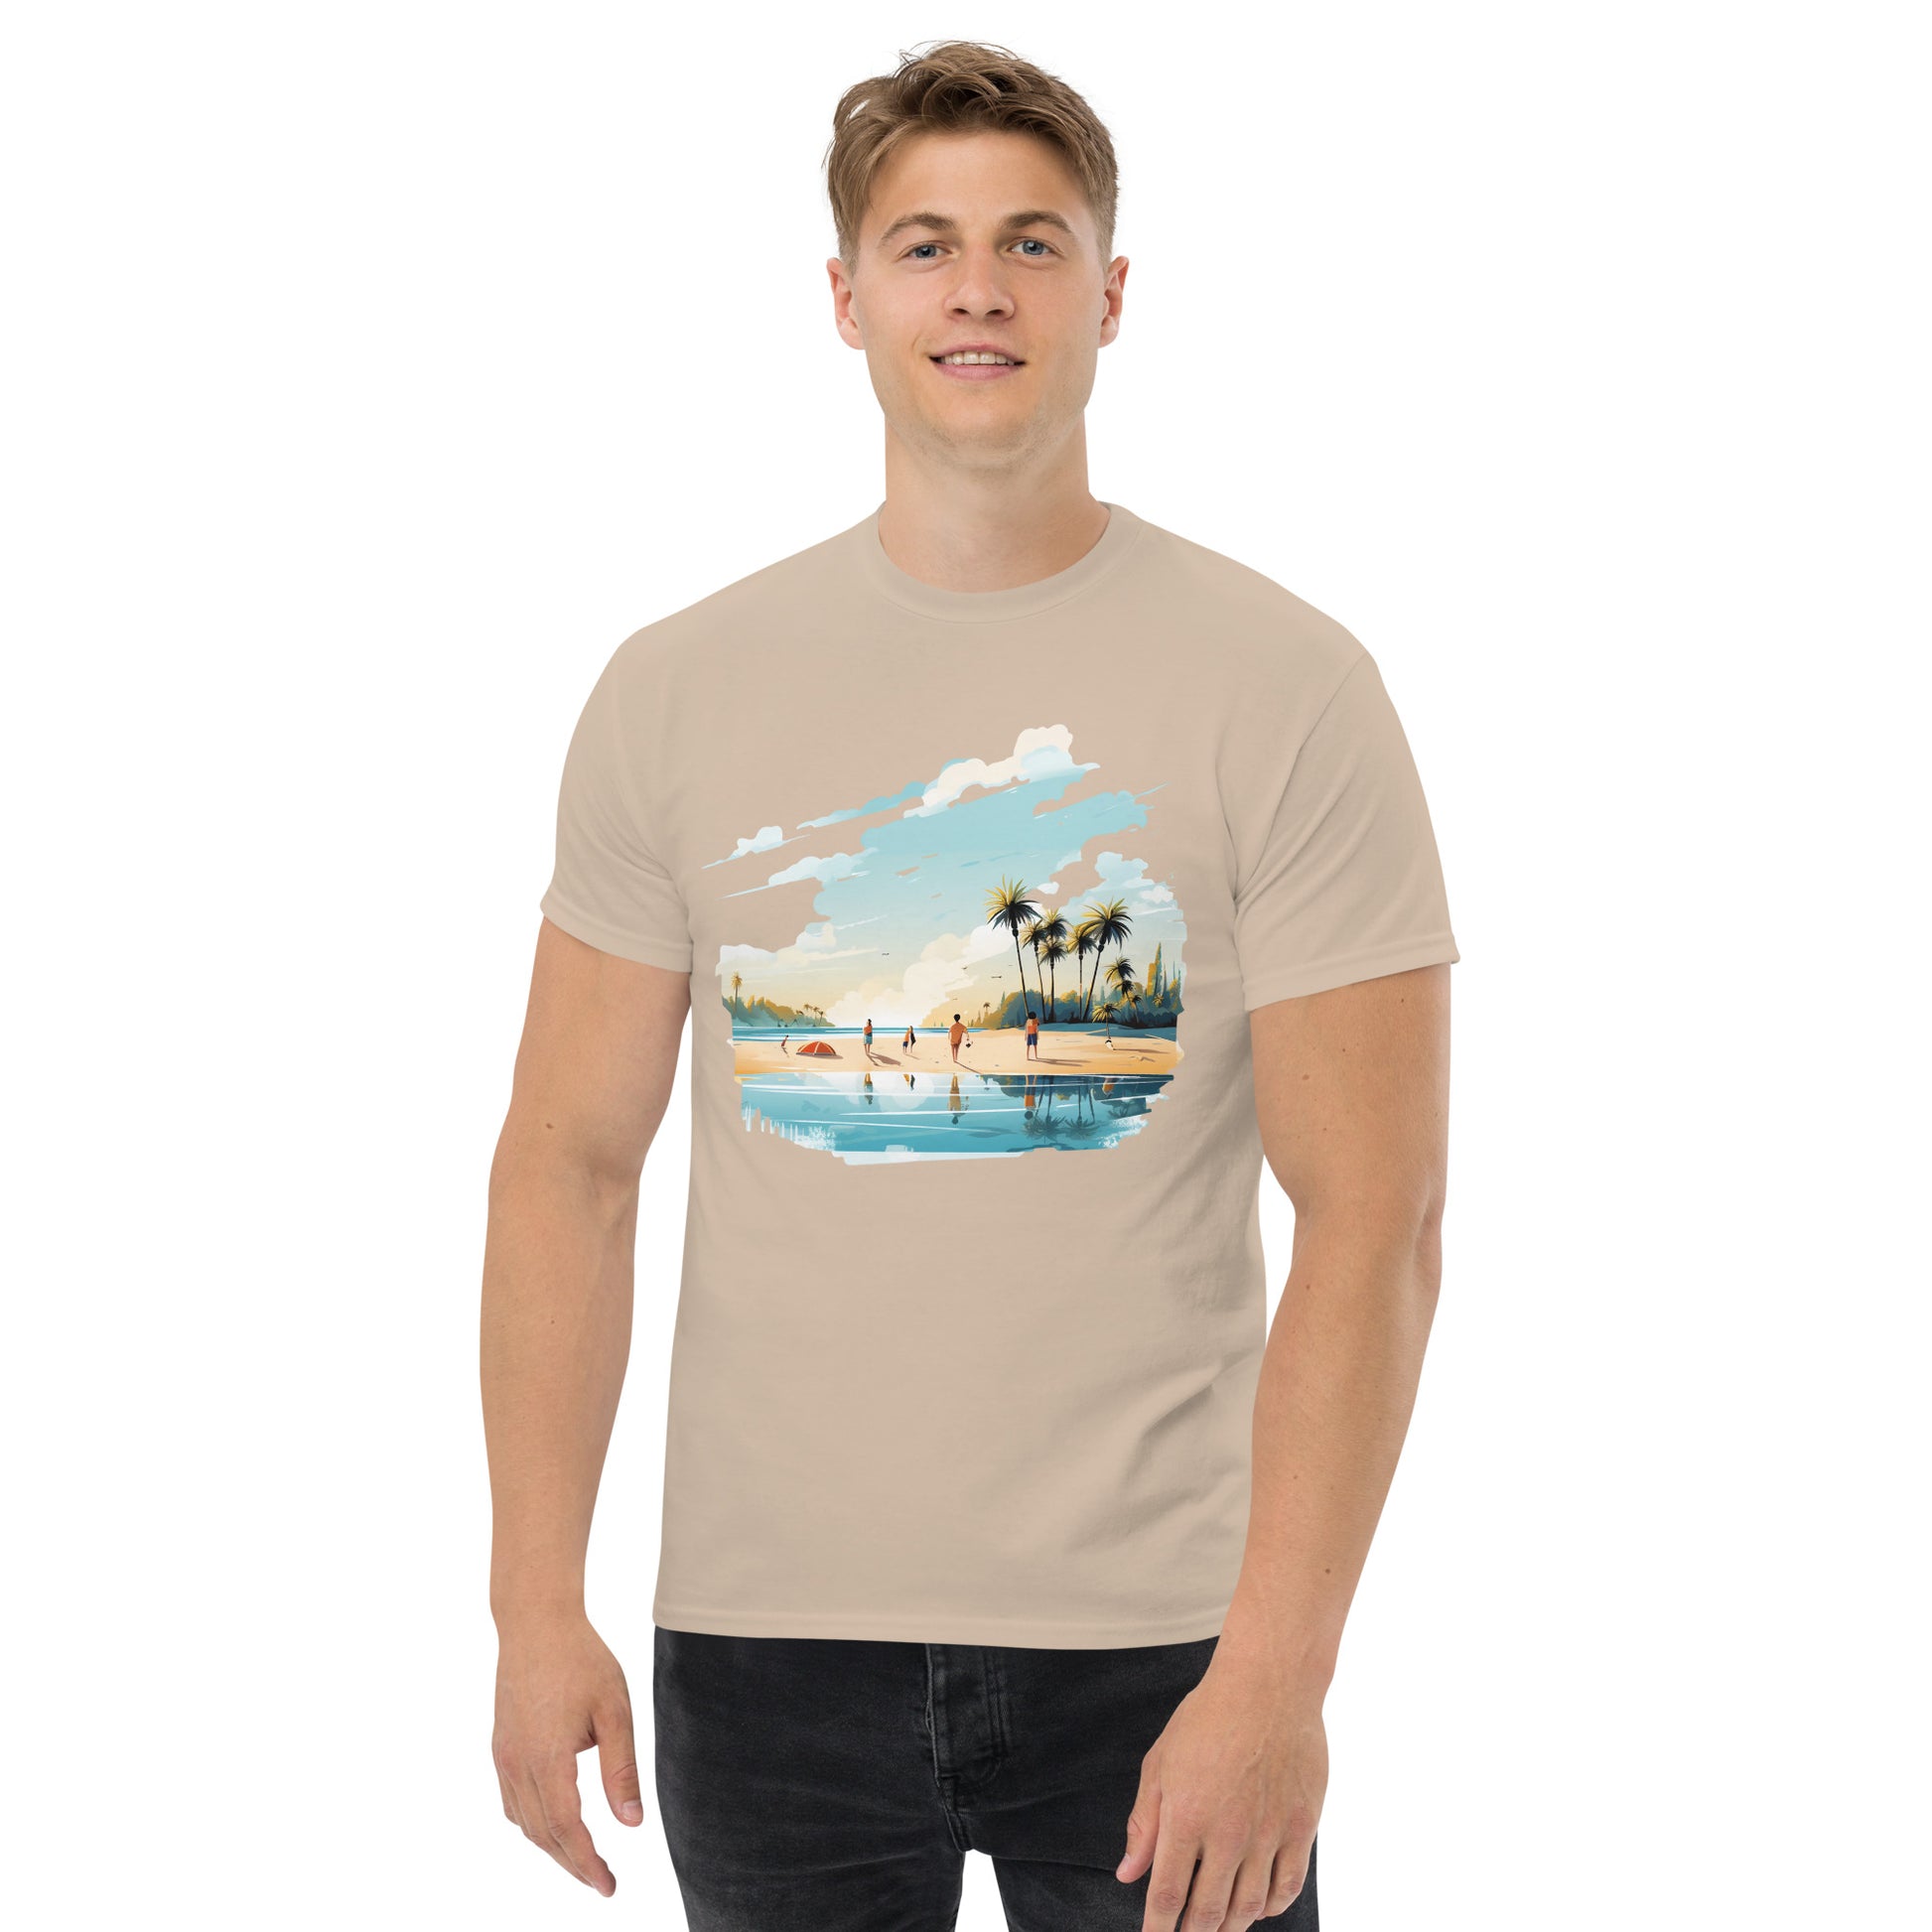 Men with sand T-shirt and a picture of a island with sea and sand